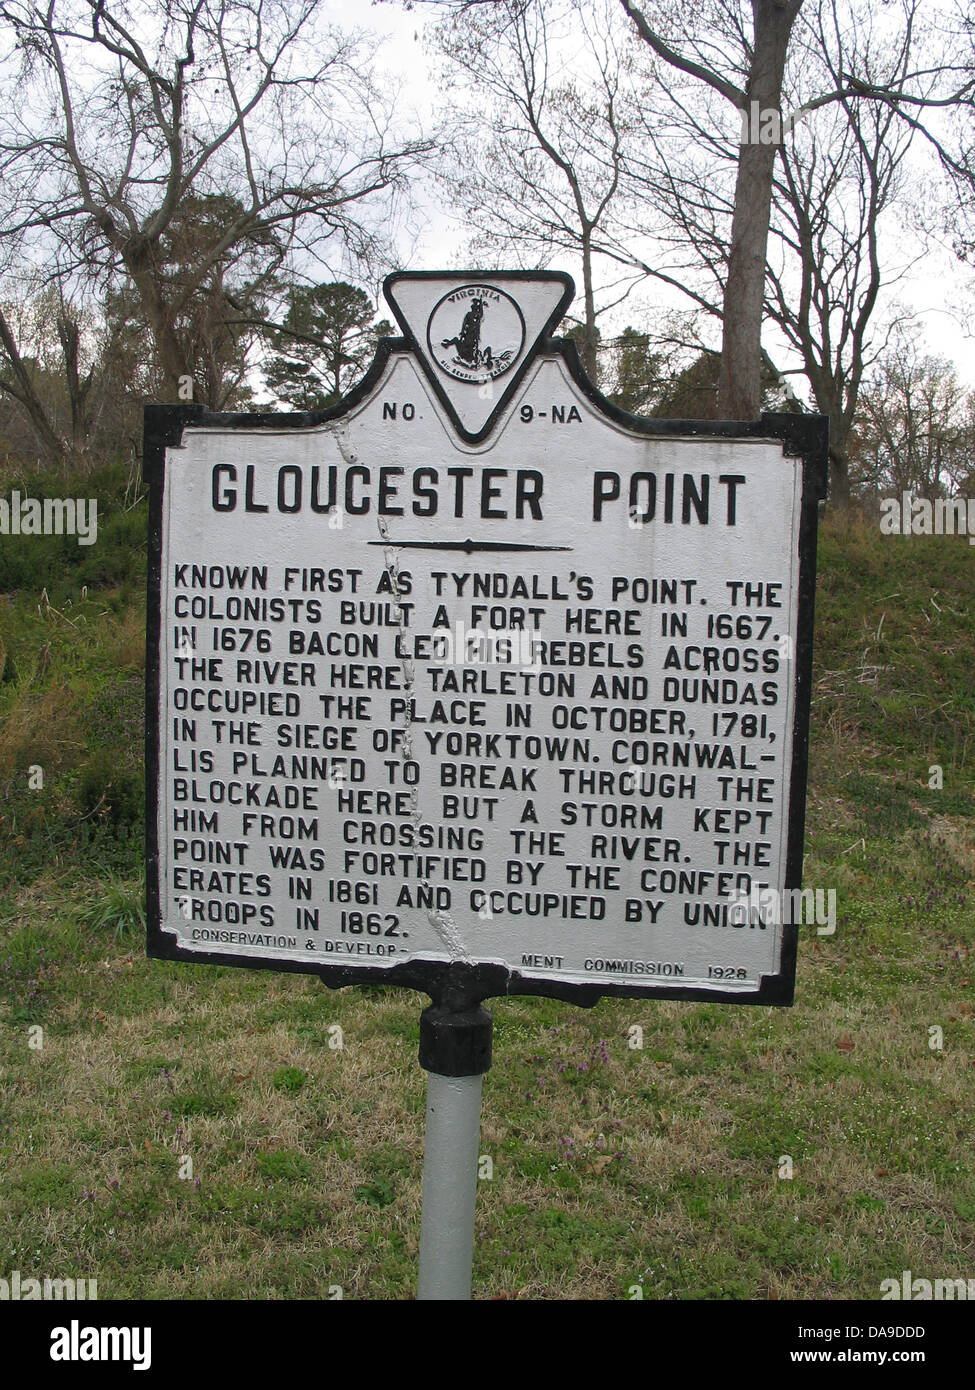 GLOUCESTER POINT Known first as Tyndall's Point. The colonists built a fort here in 1667. In 1676 Bacon led his rebels across the river here. Tarleton and Dundas occupied the place in October, 1781, in the siege of Yorktown. Cornwallis planned to break through the blockade here, but a storm kept him from crossing the river. The point was fortified by the Confederates in 1861 and occupied by Union troops in 1862. Conservation & Development Commission, 1928 Stock Photo